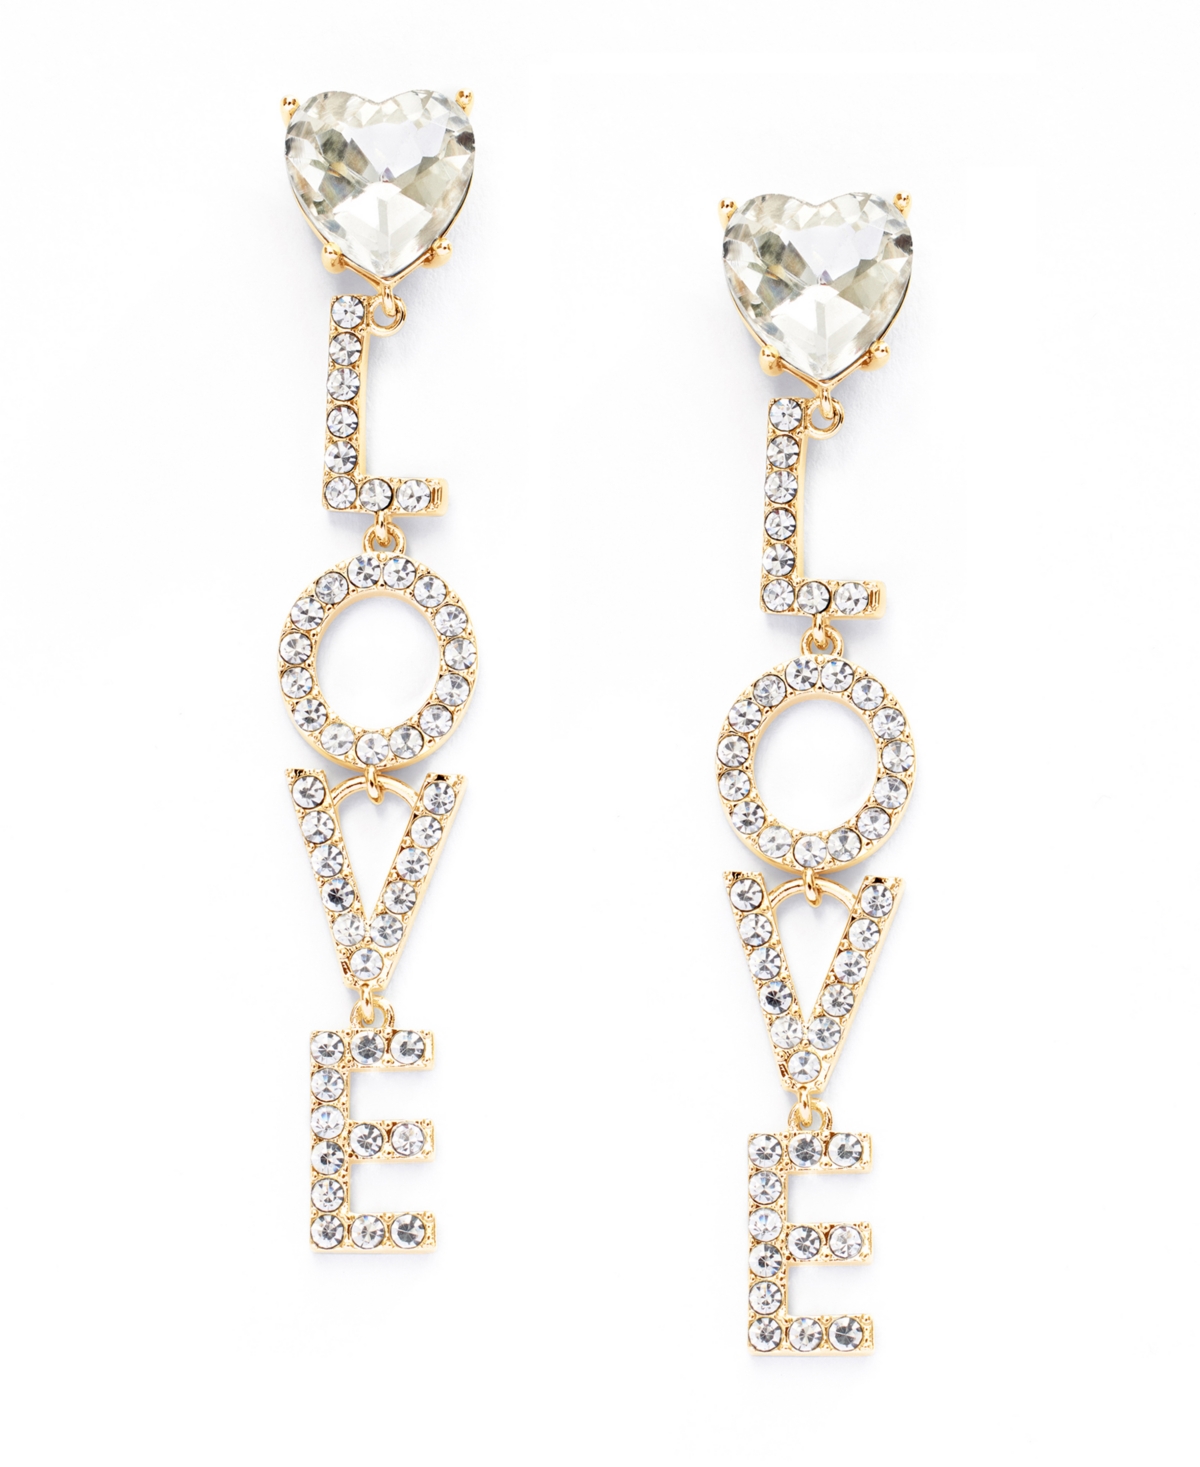 Kleinfeld Faux Stone Pave Love Statement Drop Earrings In Crystal,gold